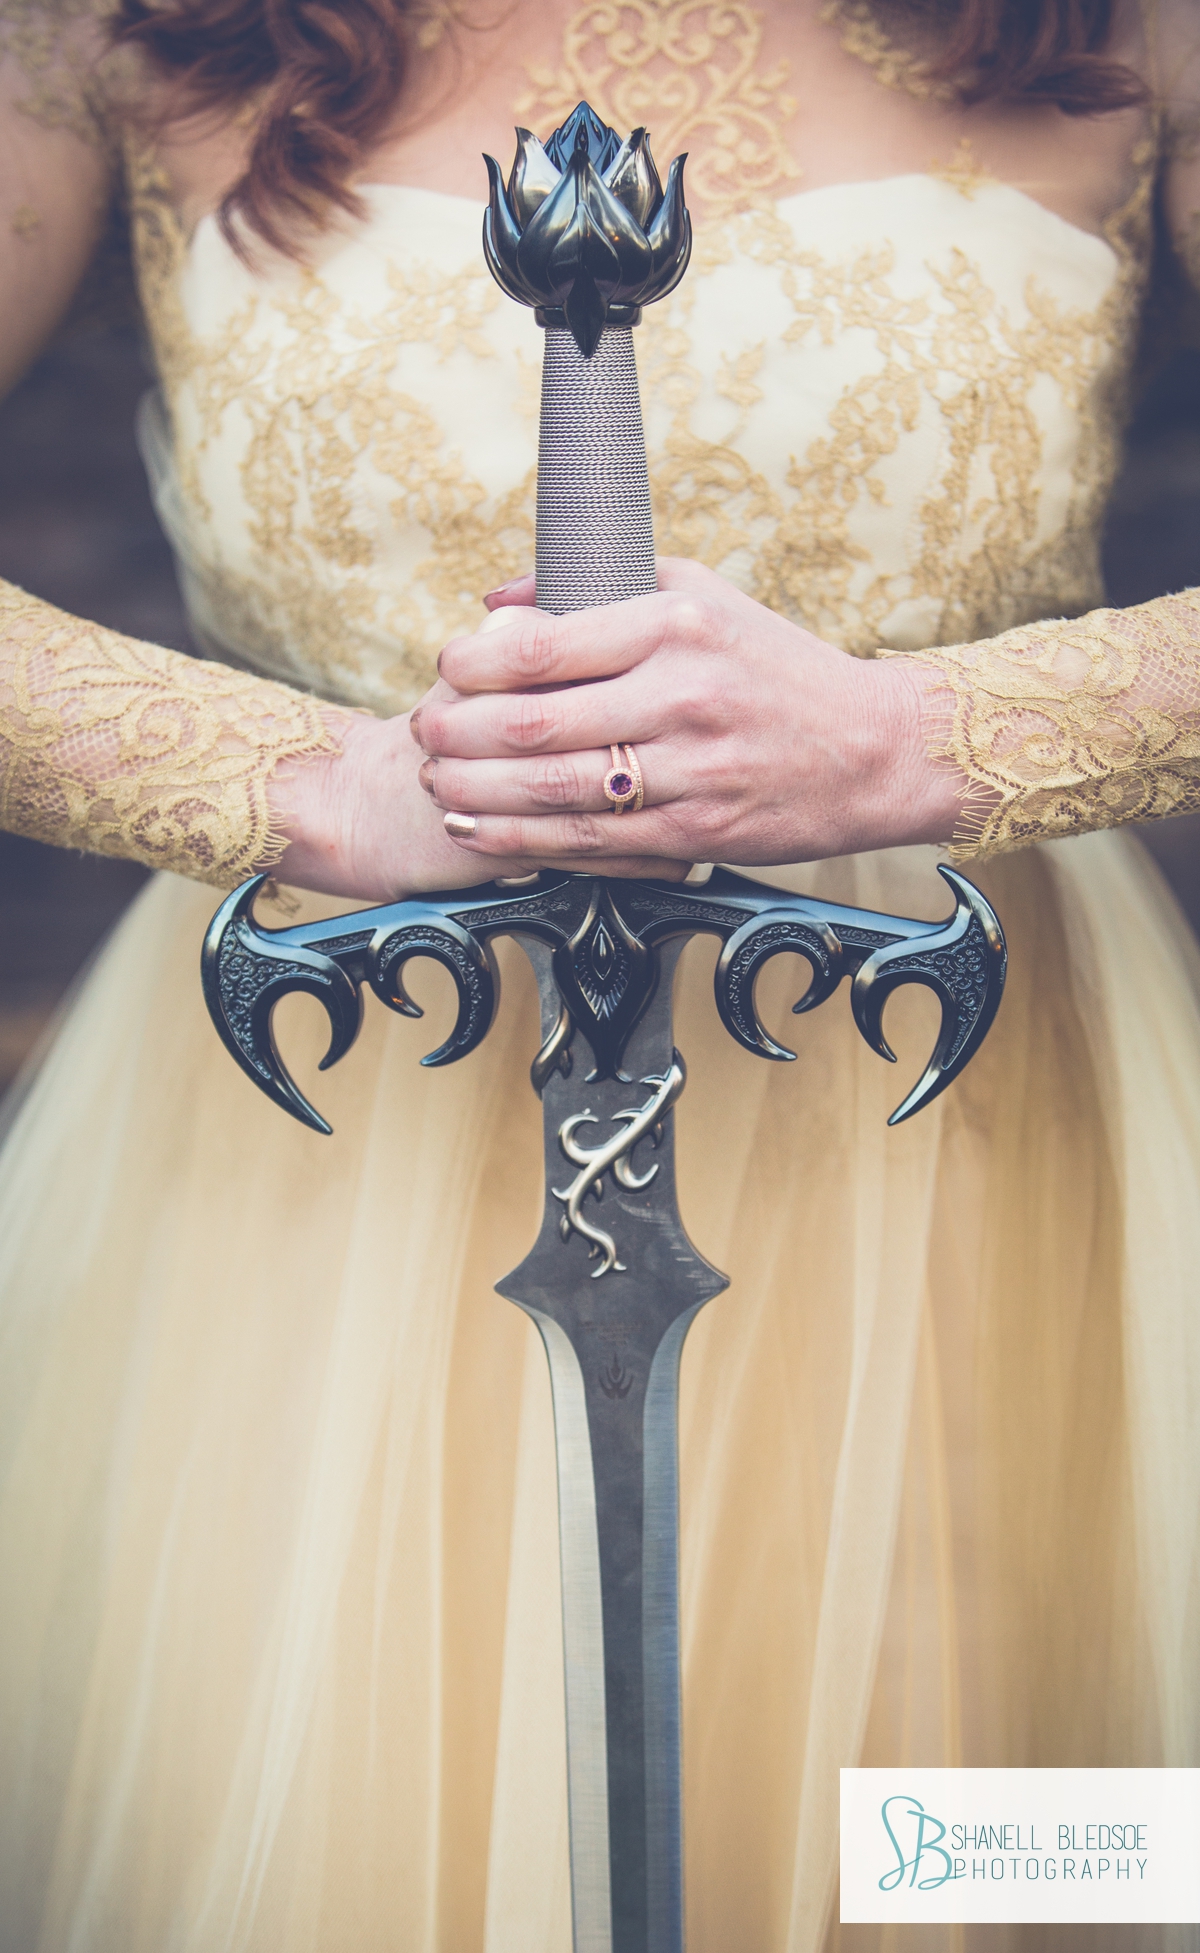 game of thrones theme wedding inspiration, gold lace dress, sword in ladies hands